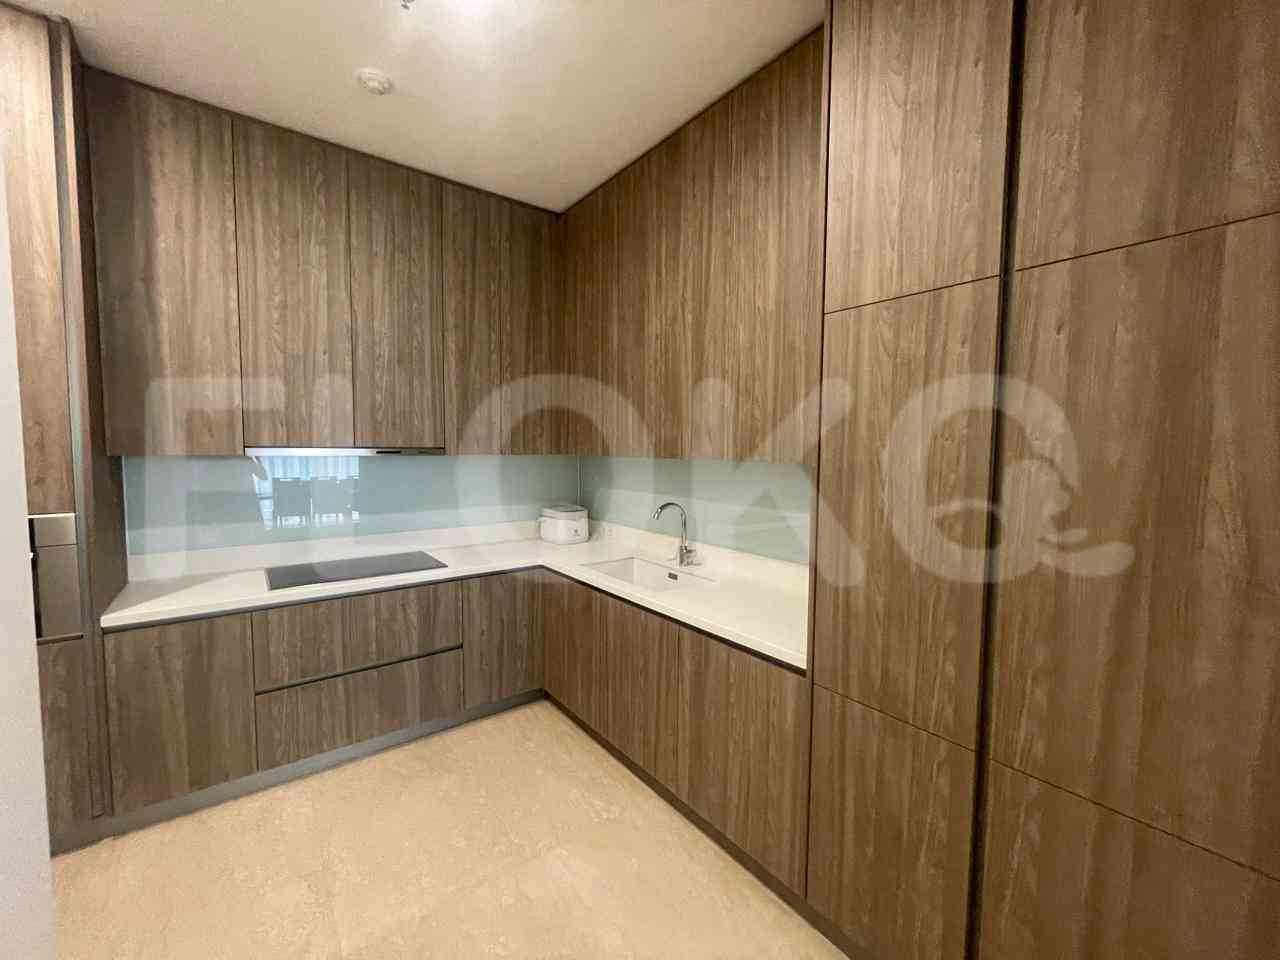 4 Bedroom on 2nd Floor for Rent in Pakubuwono Spring Apartment - fga354 2